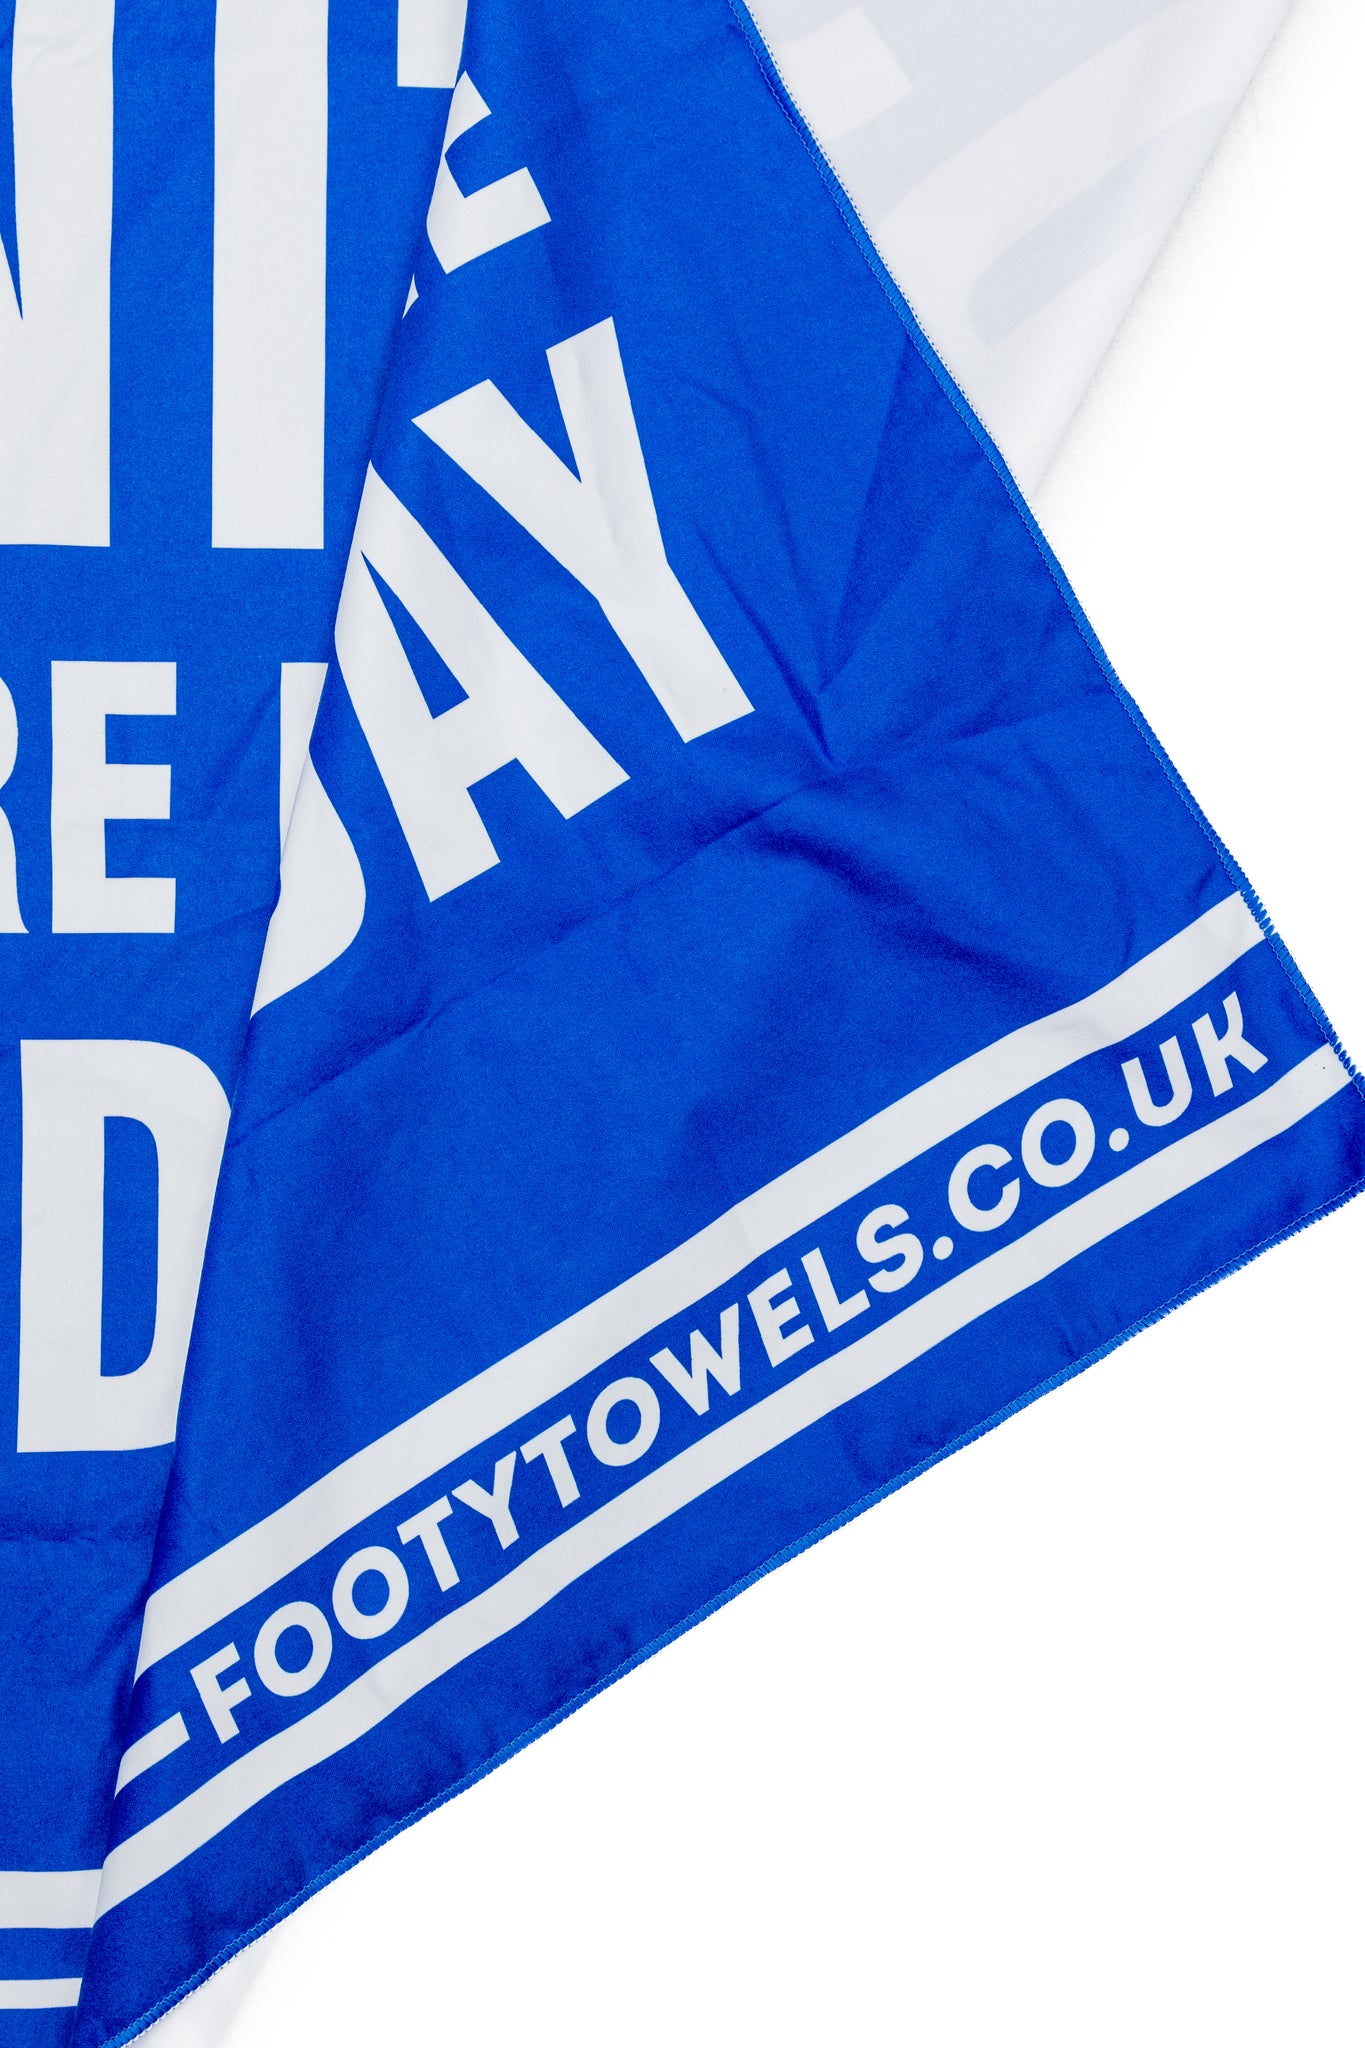 Sheffield Wednesday - Only one Wednesday – Footy Towels